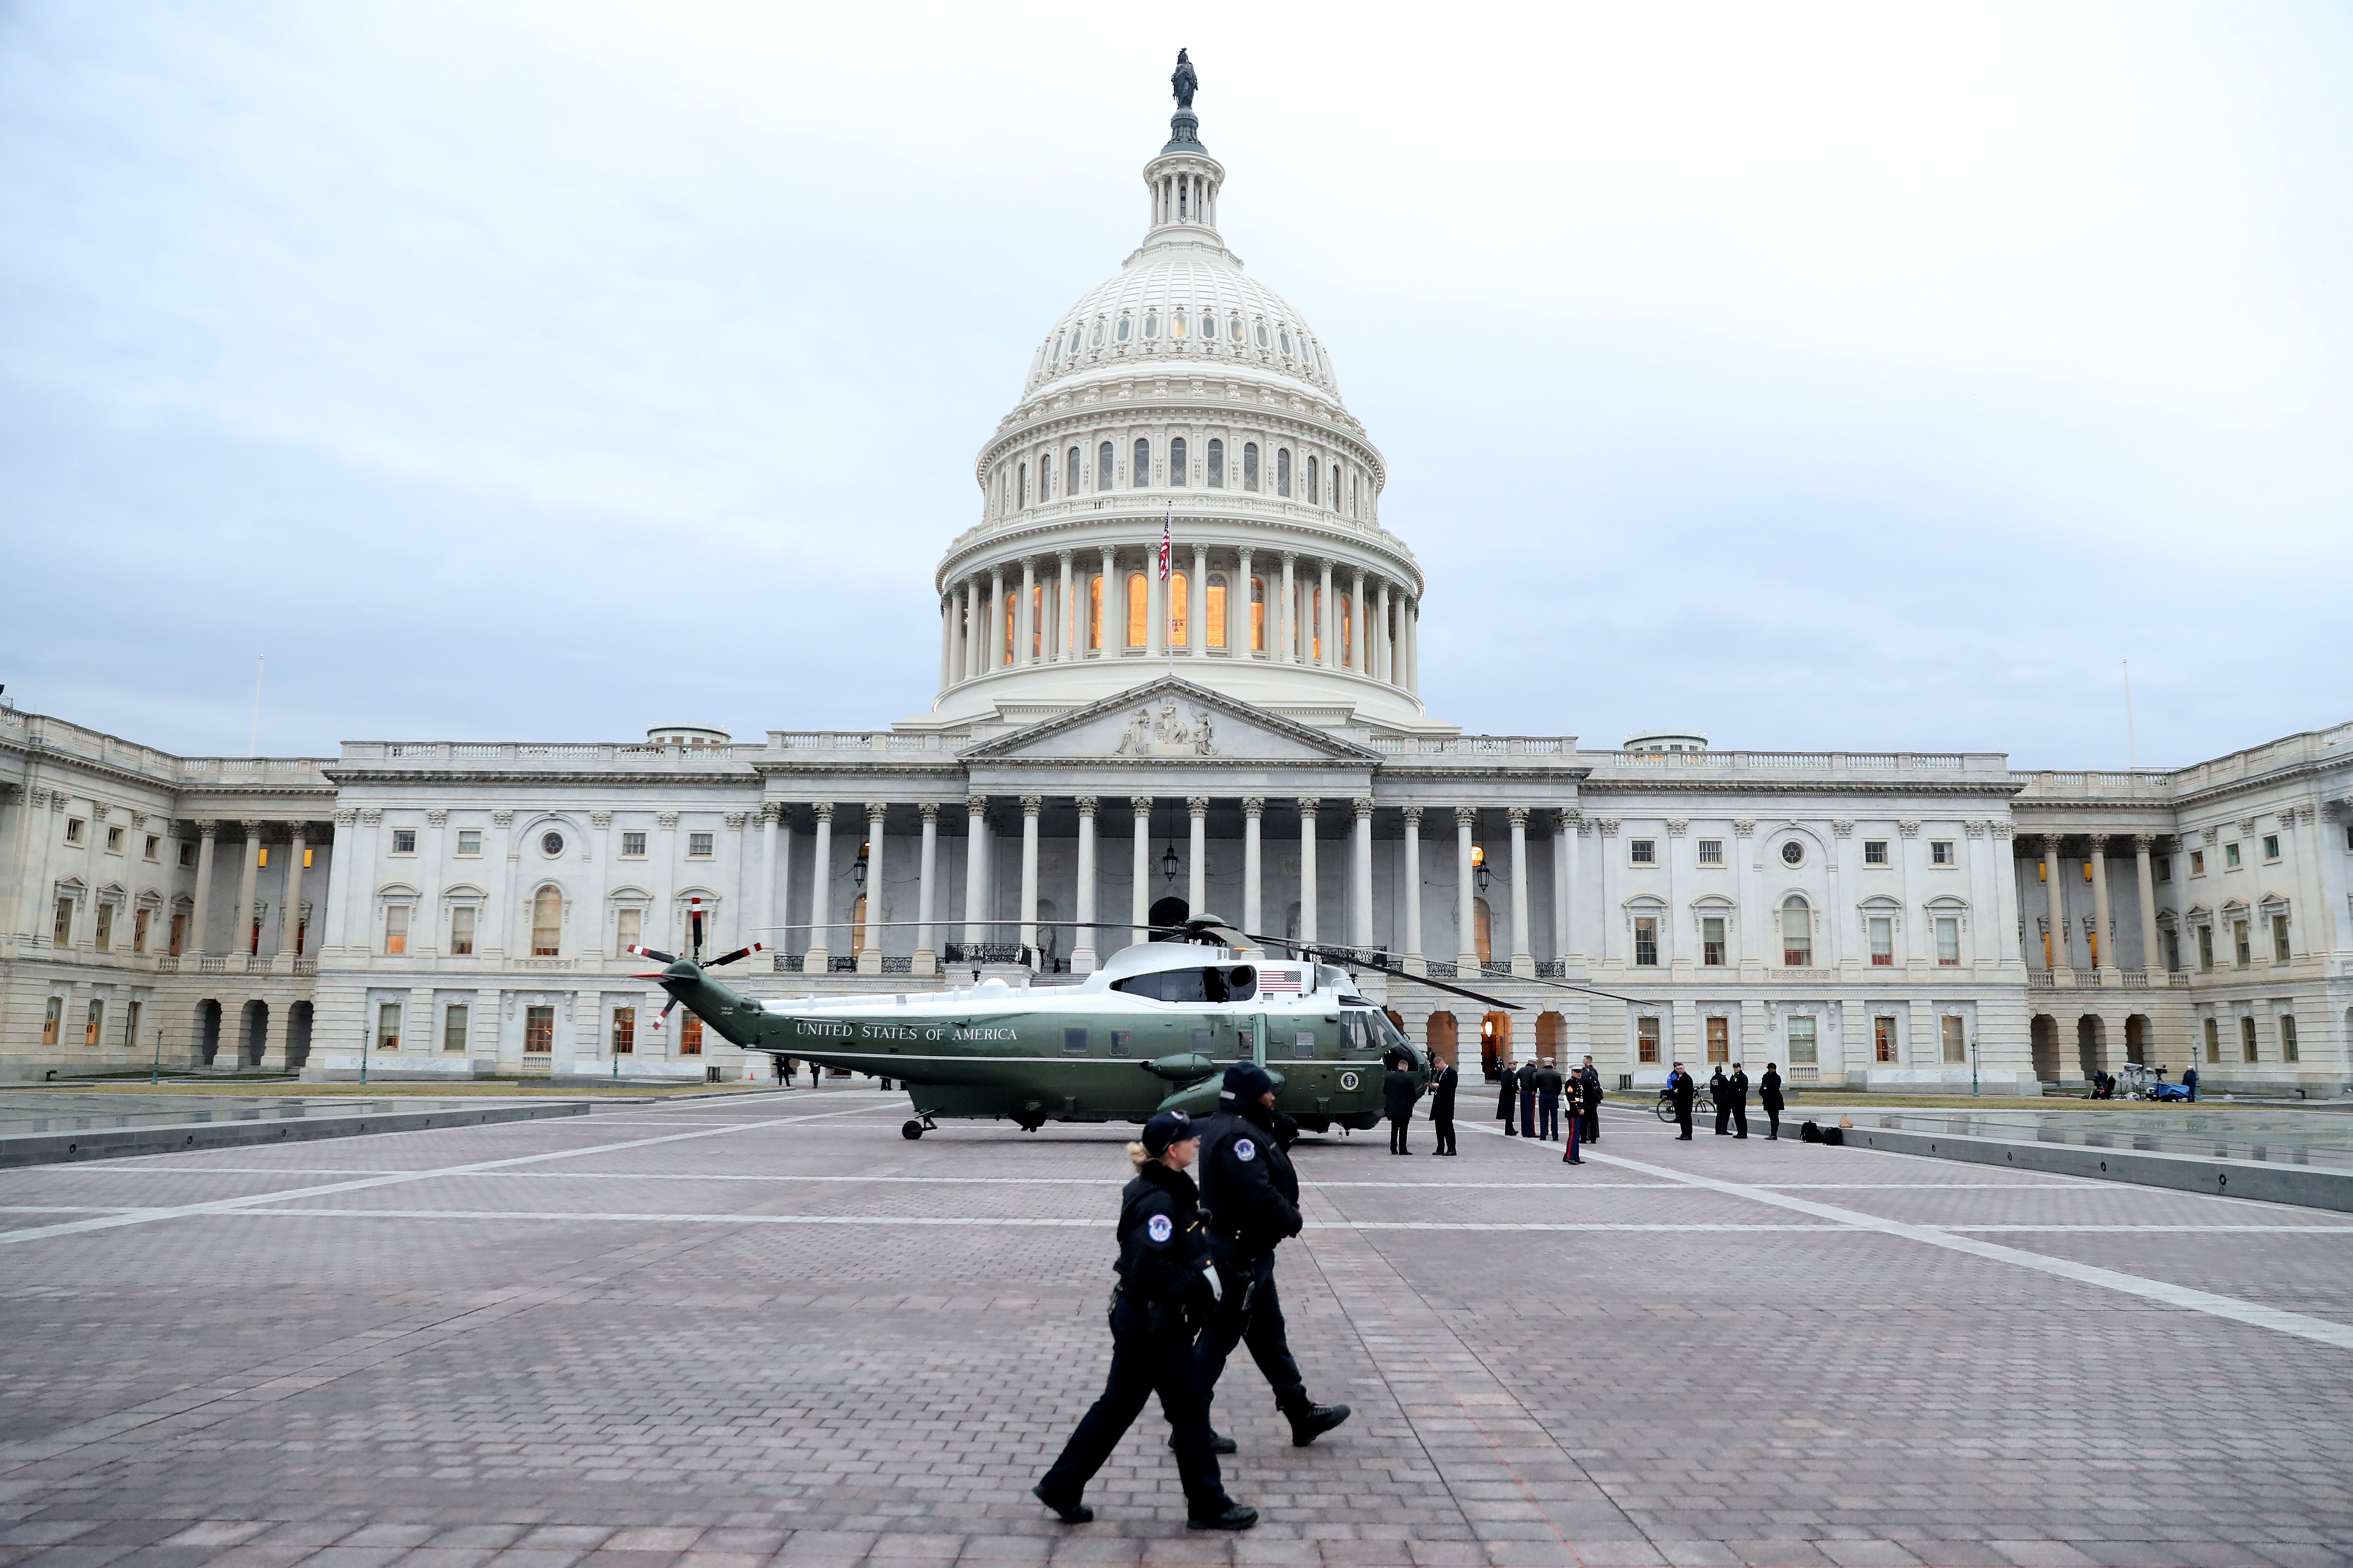 A military helicopter lands at the U.S. Capitol in Washington, DC, U.S., January 20, 2017. In today's inauguration ceremony Donald J. Trump becomes the 45th president of the United States. REUTERS/Rob Carr/Pool - RTSWGJK